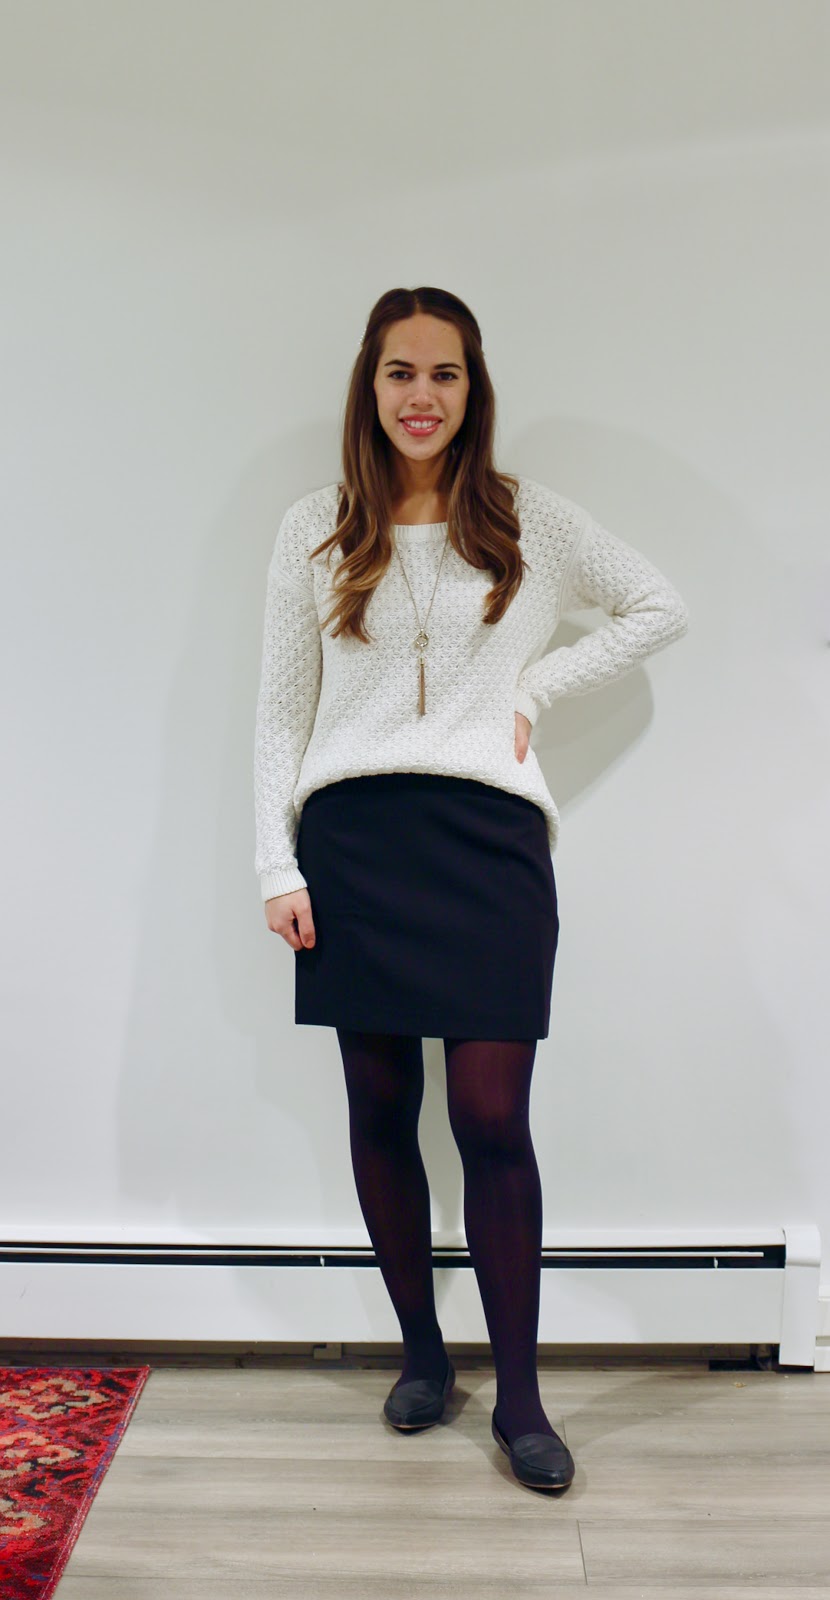 Jules in Flats - Oversize Knit Sweater with Mini Skirt (Business Casual Fall Workwear on a Budget)